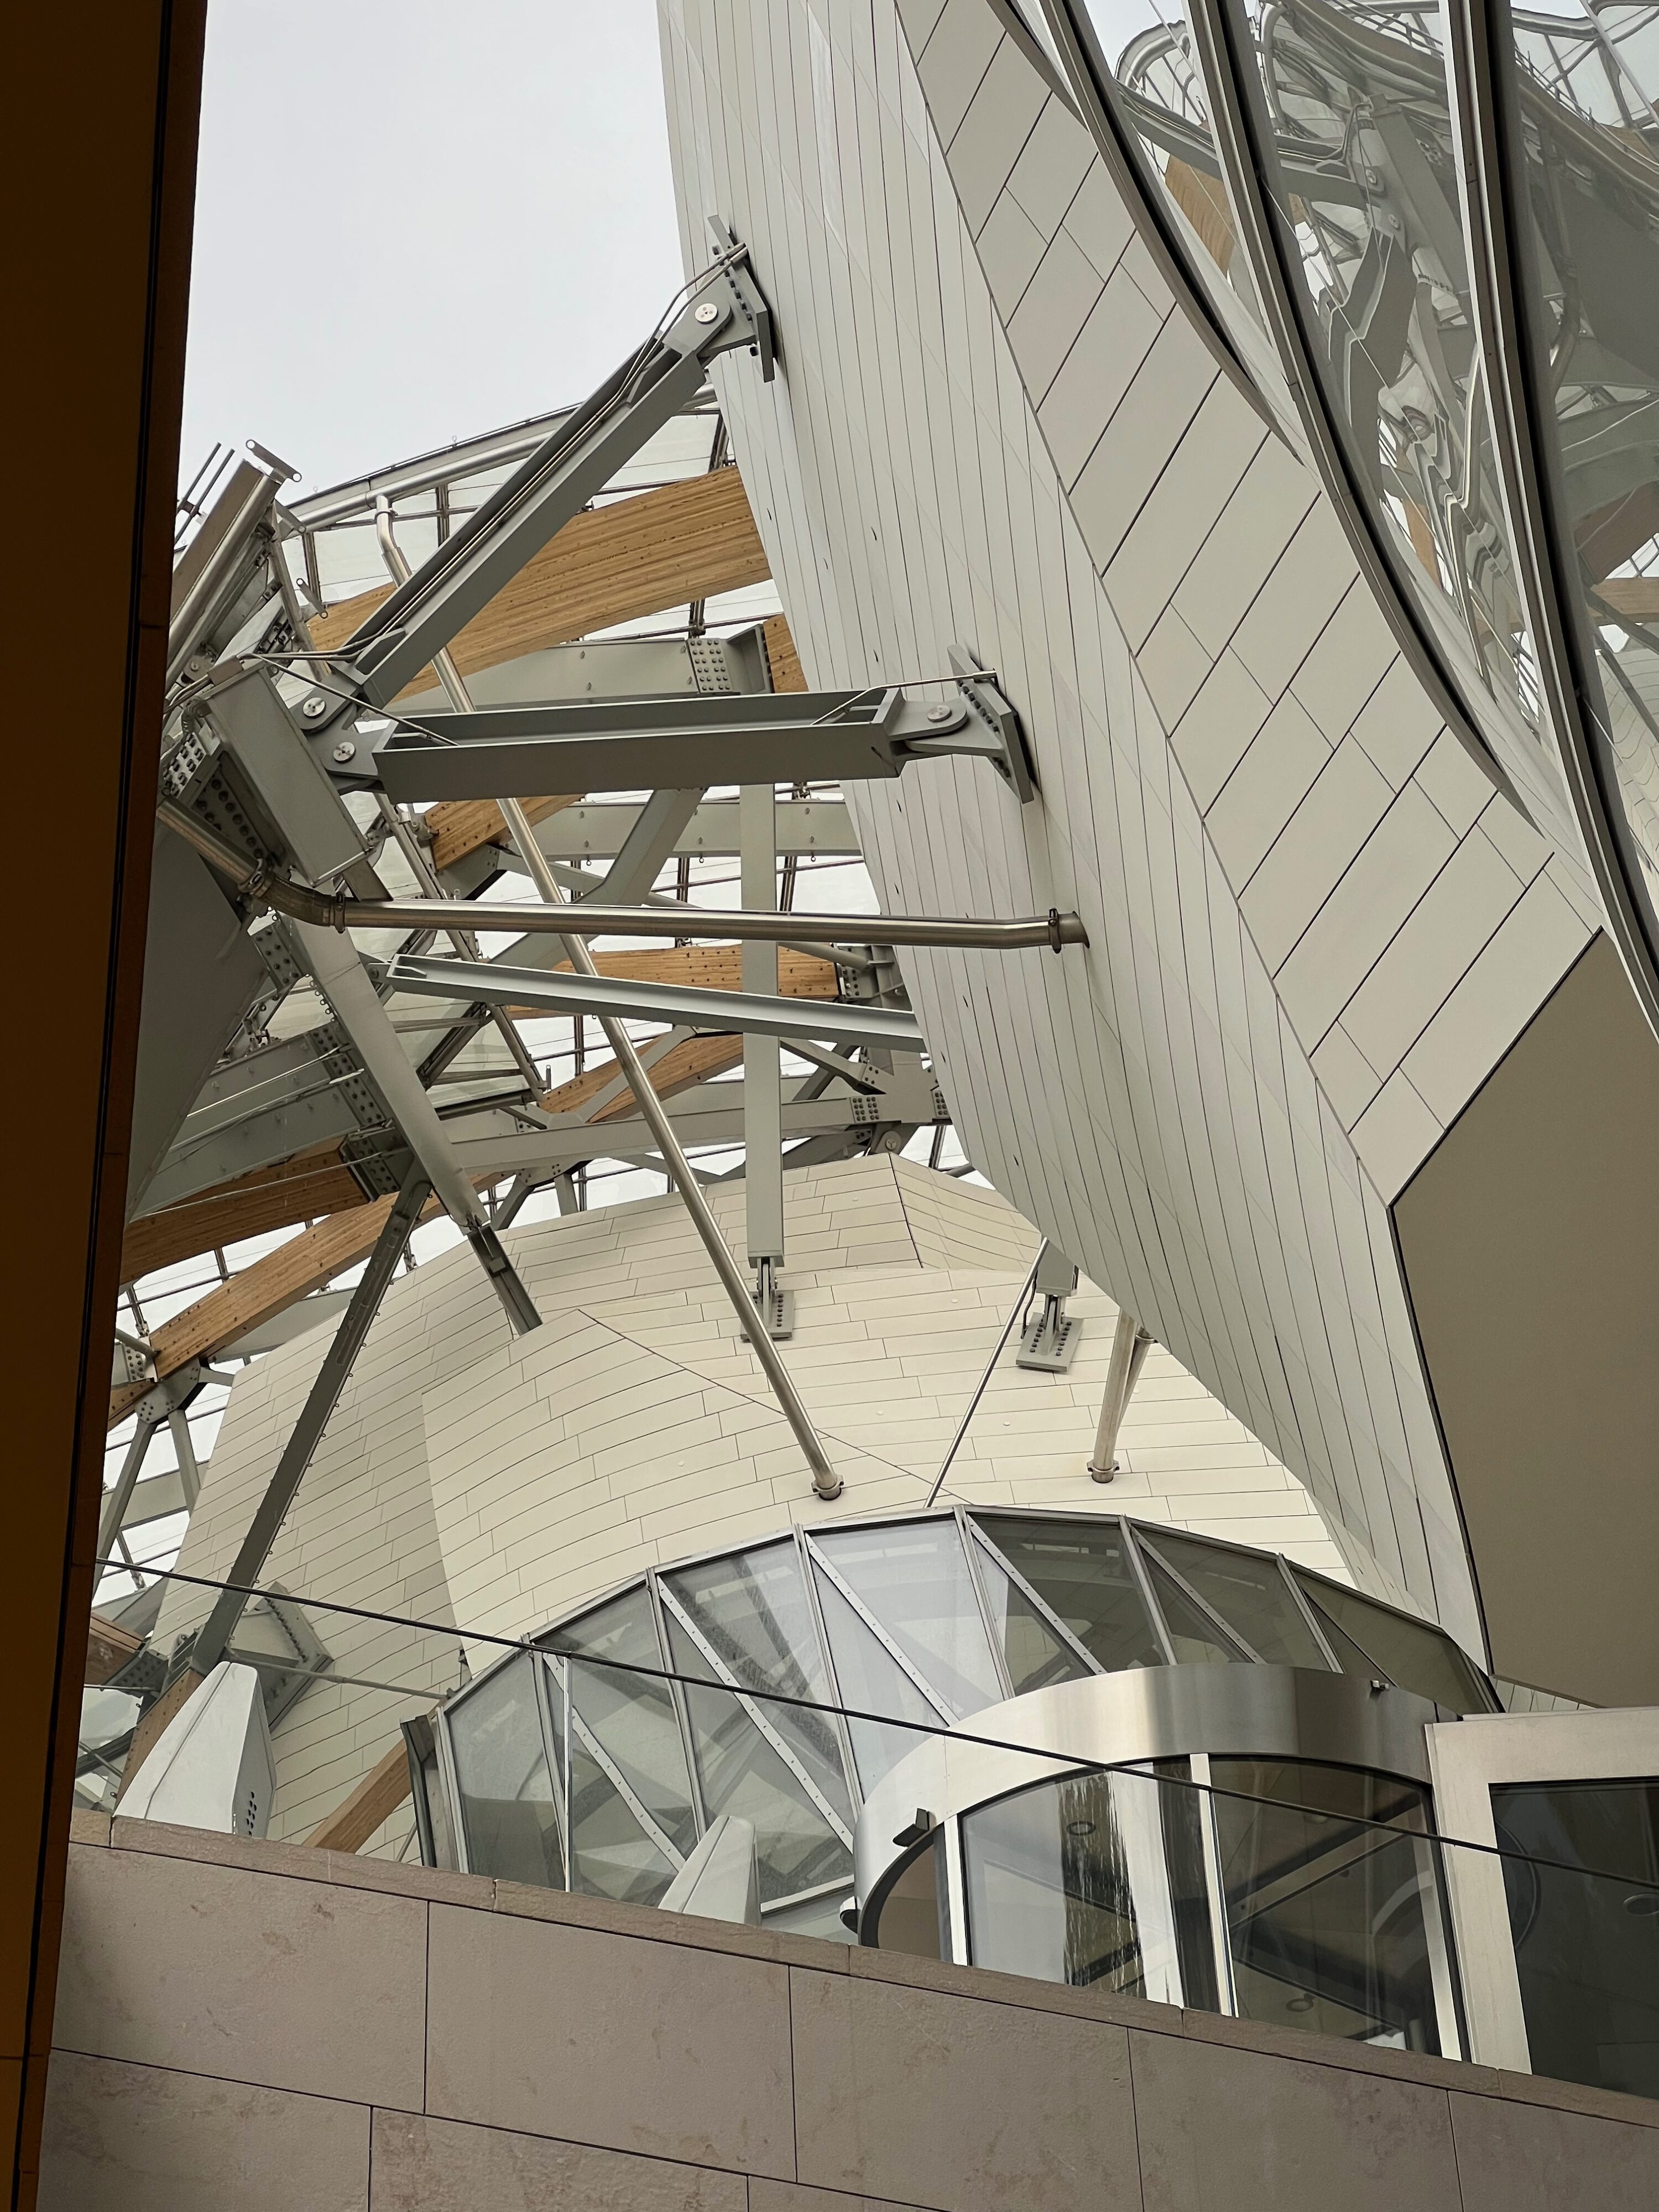 Fondation Louis Vuitton in Paris designed by Frank Gehry